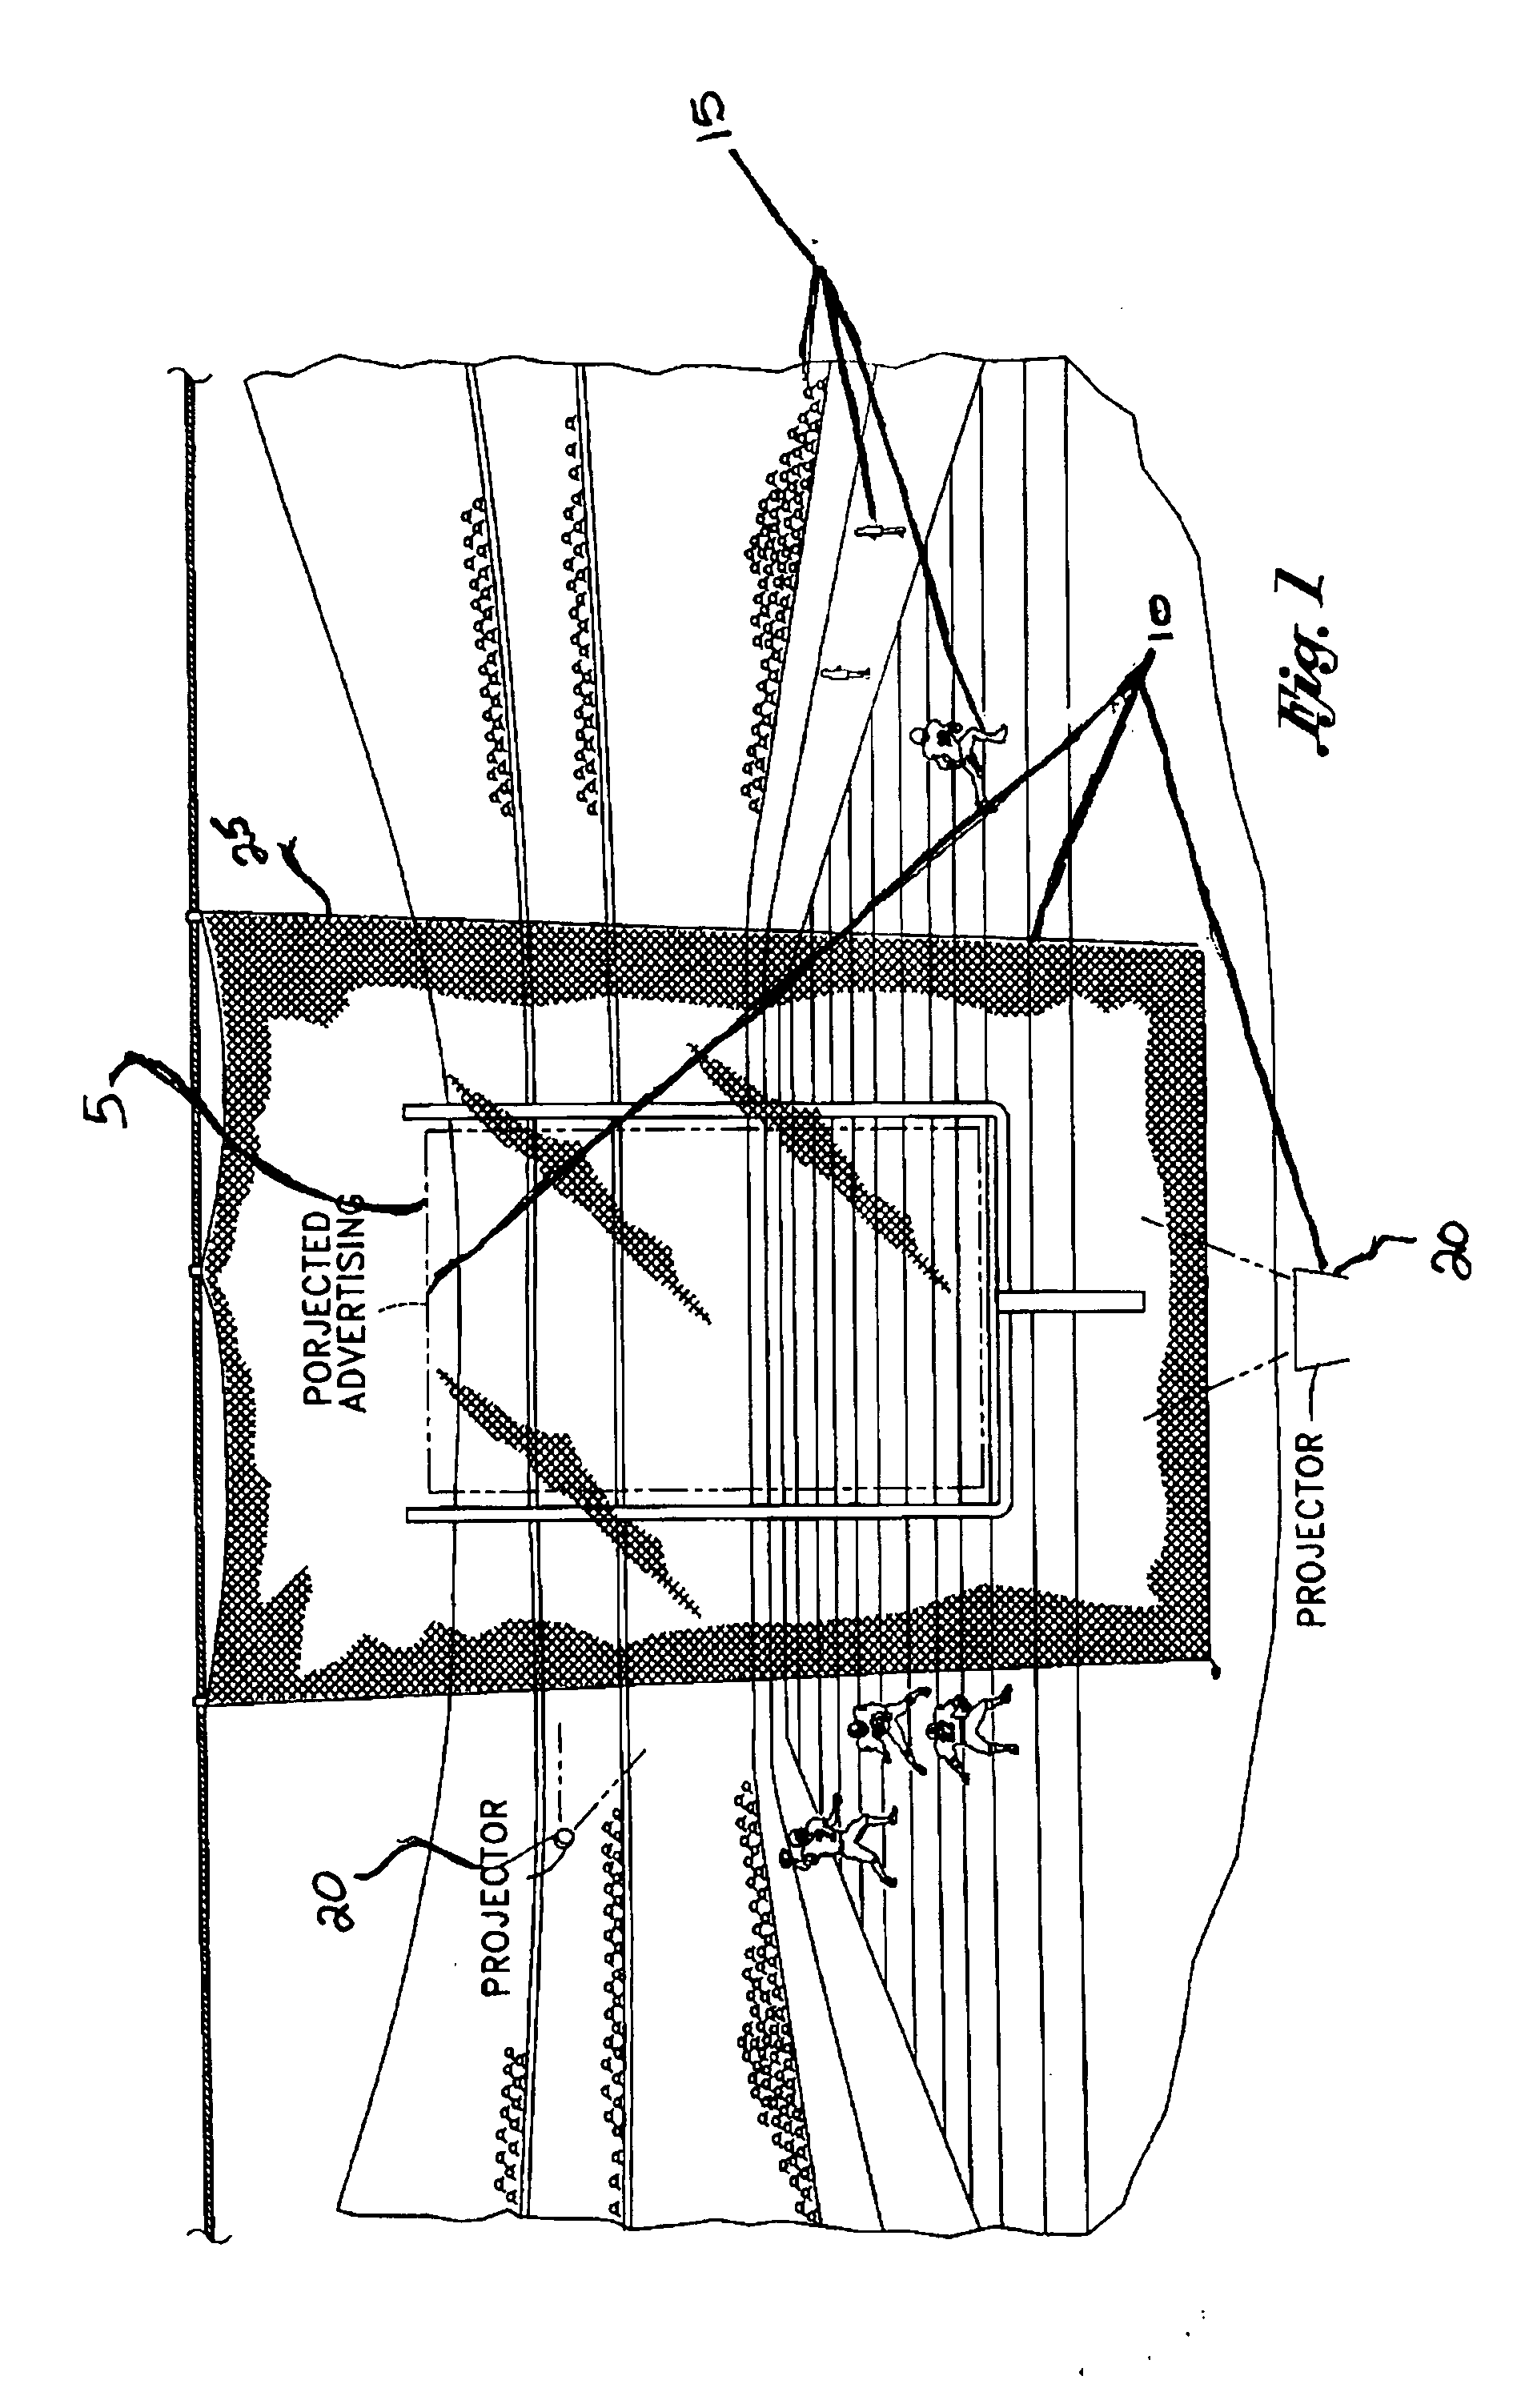 Three dimensional projection system for the display of information